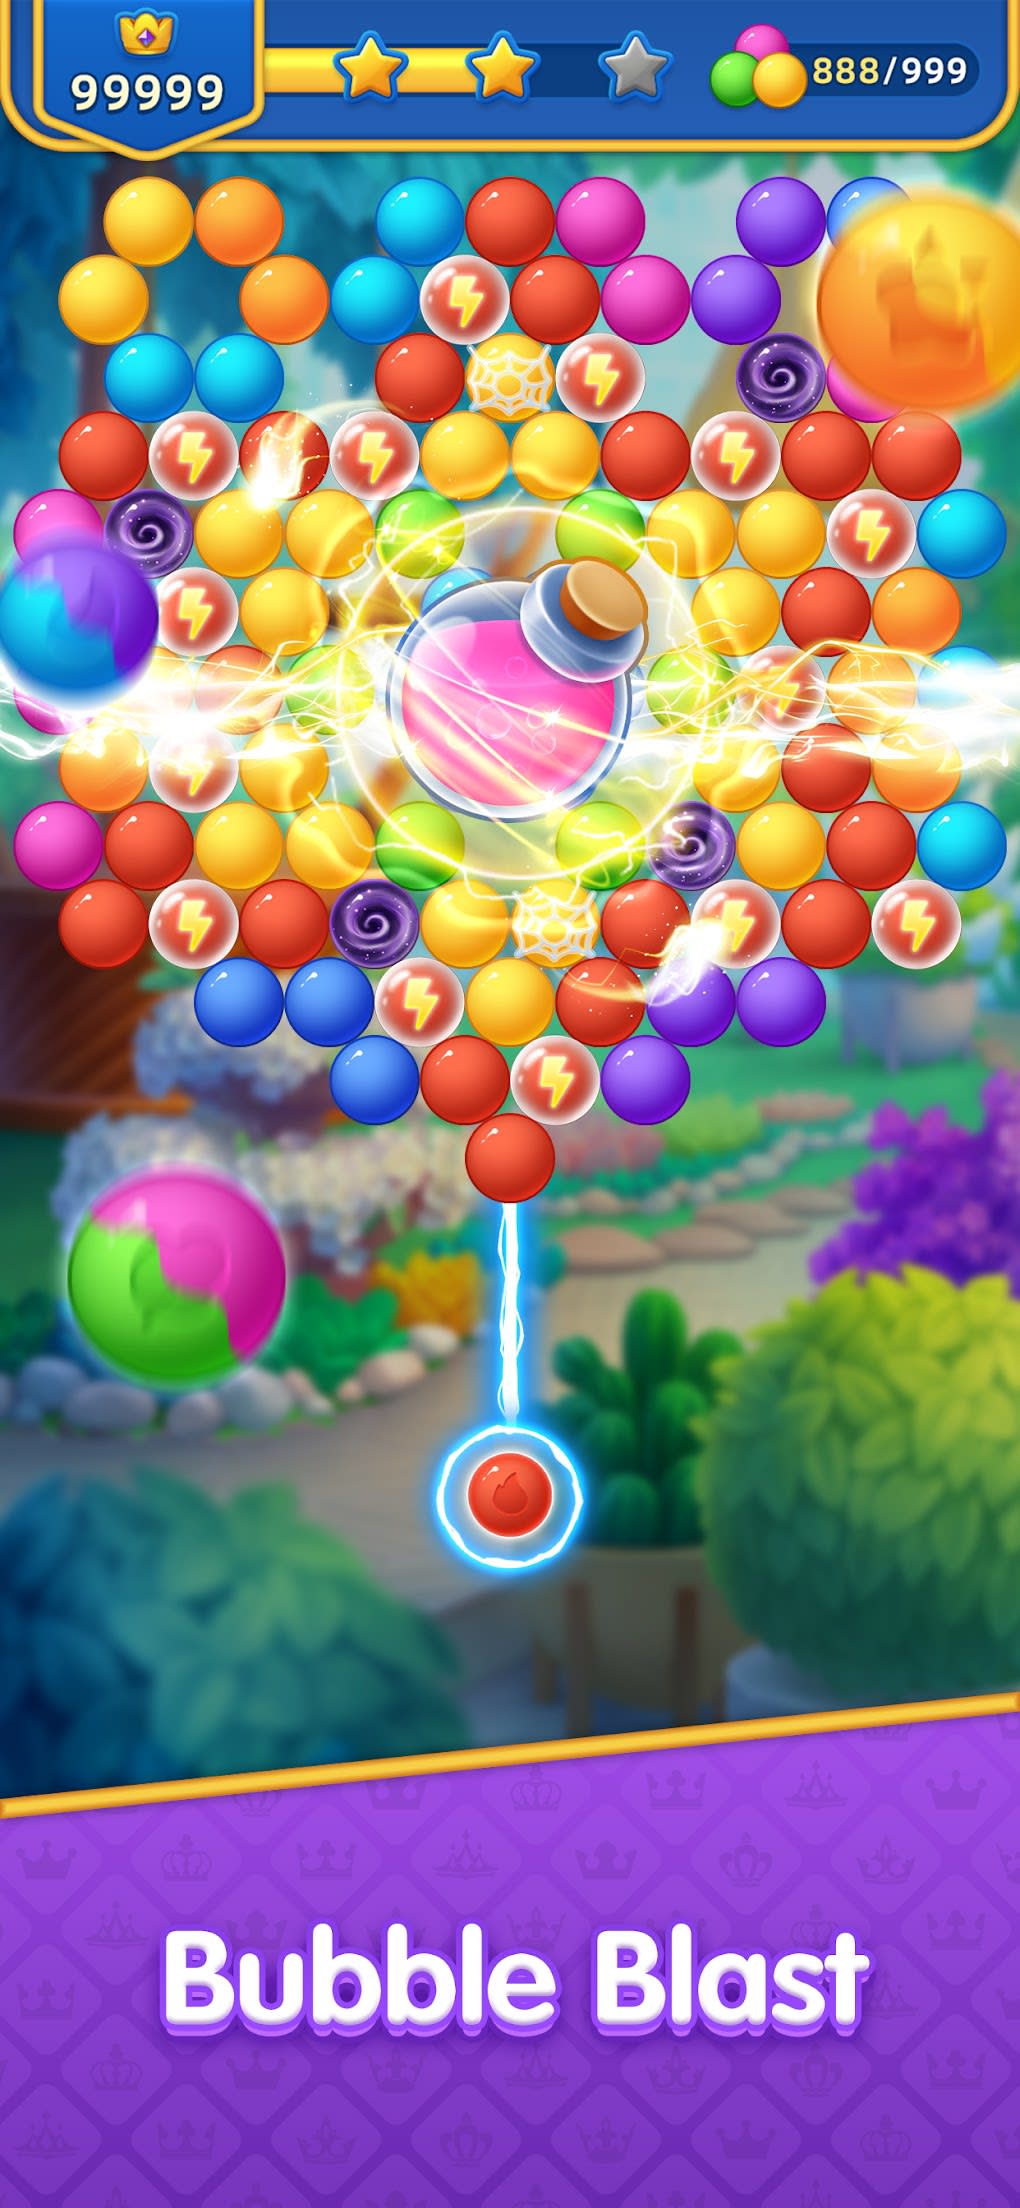 Bubble Shooter Genies for Android - Free App Download